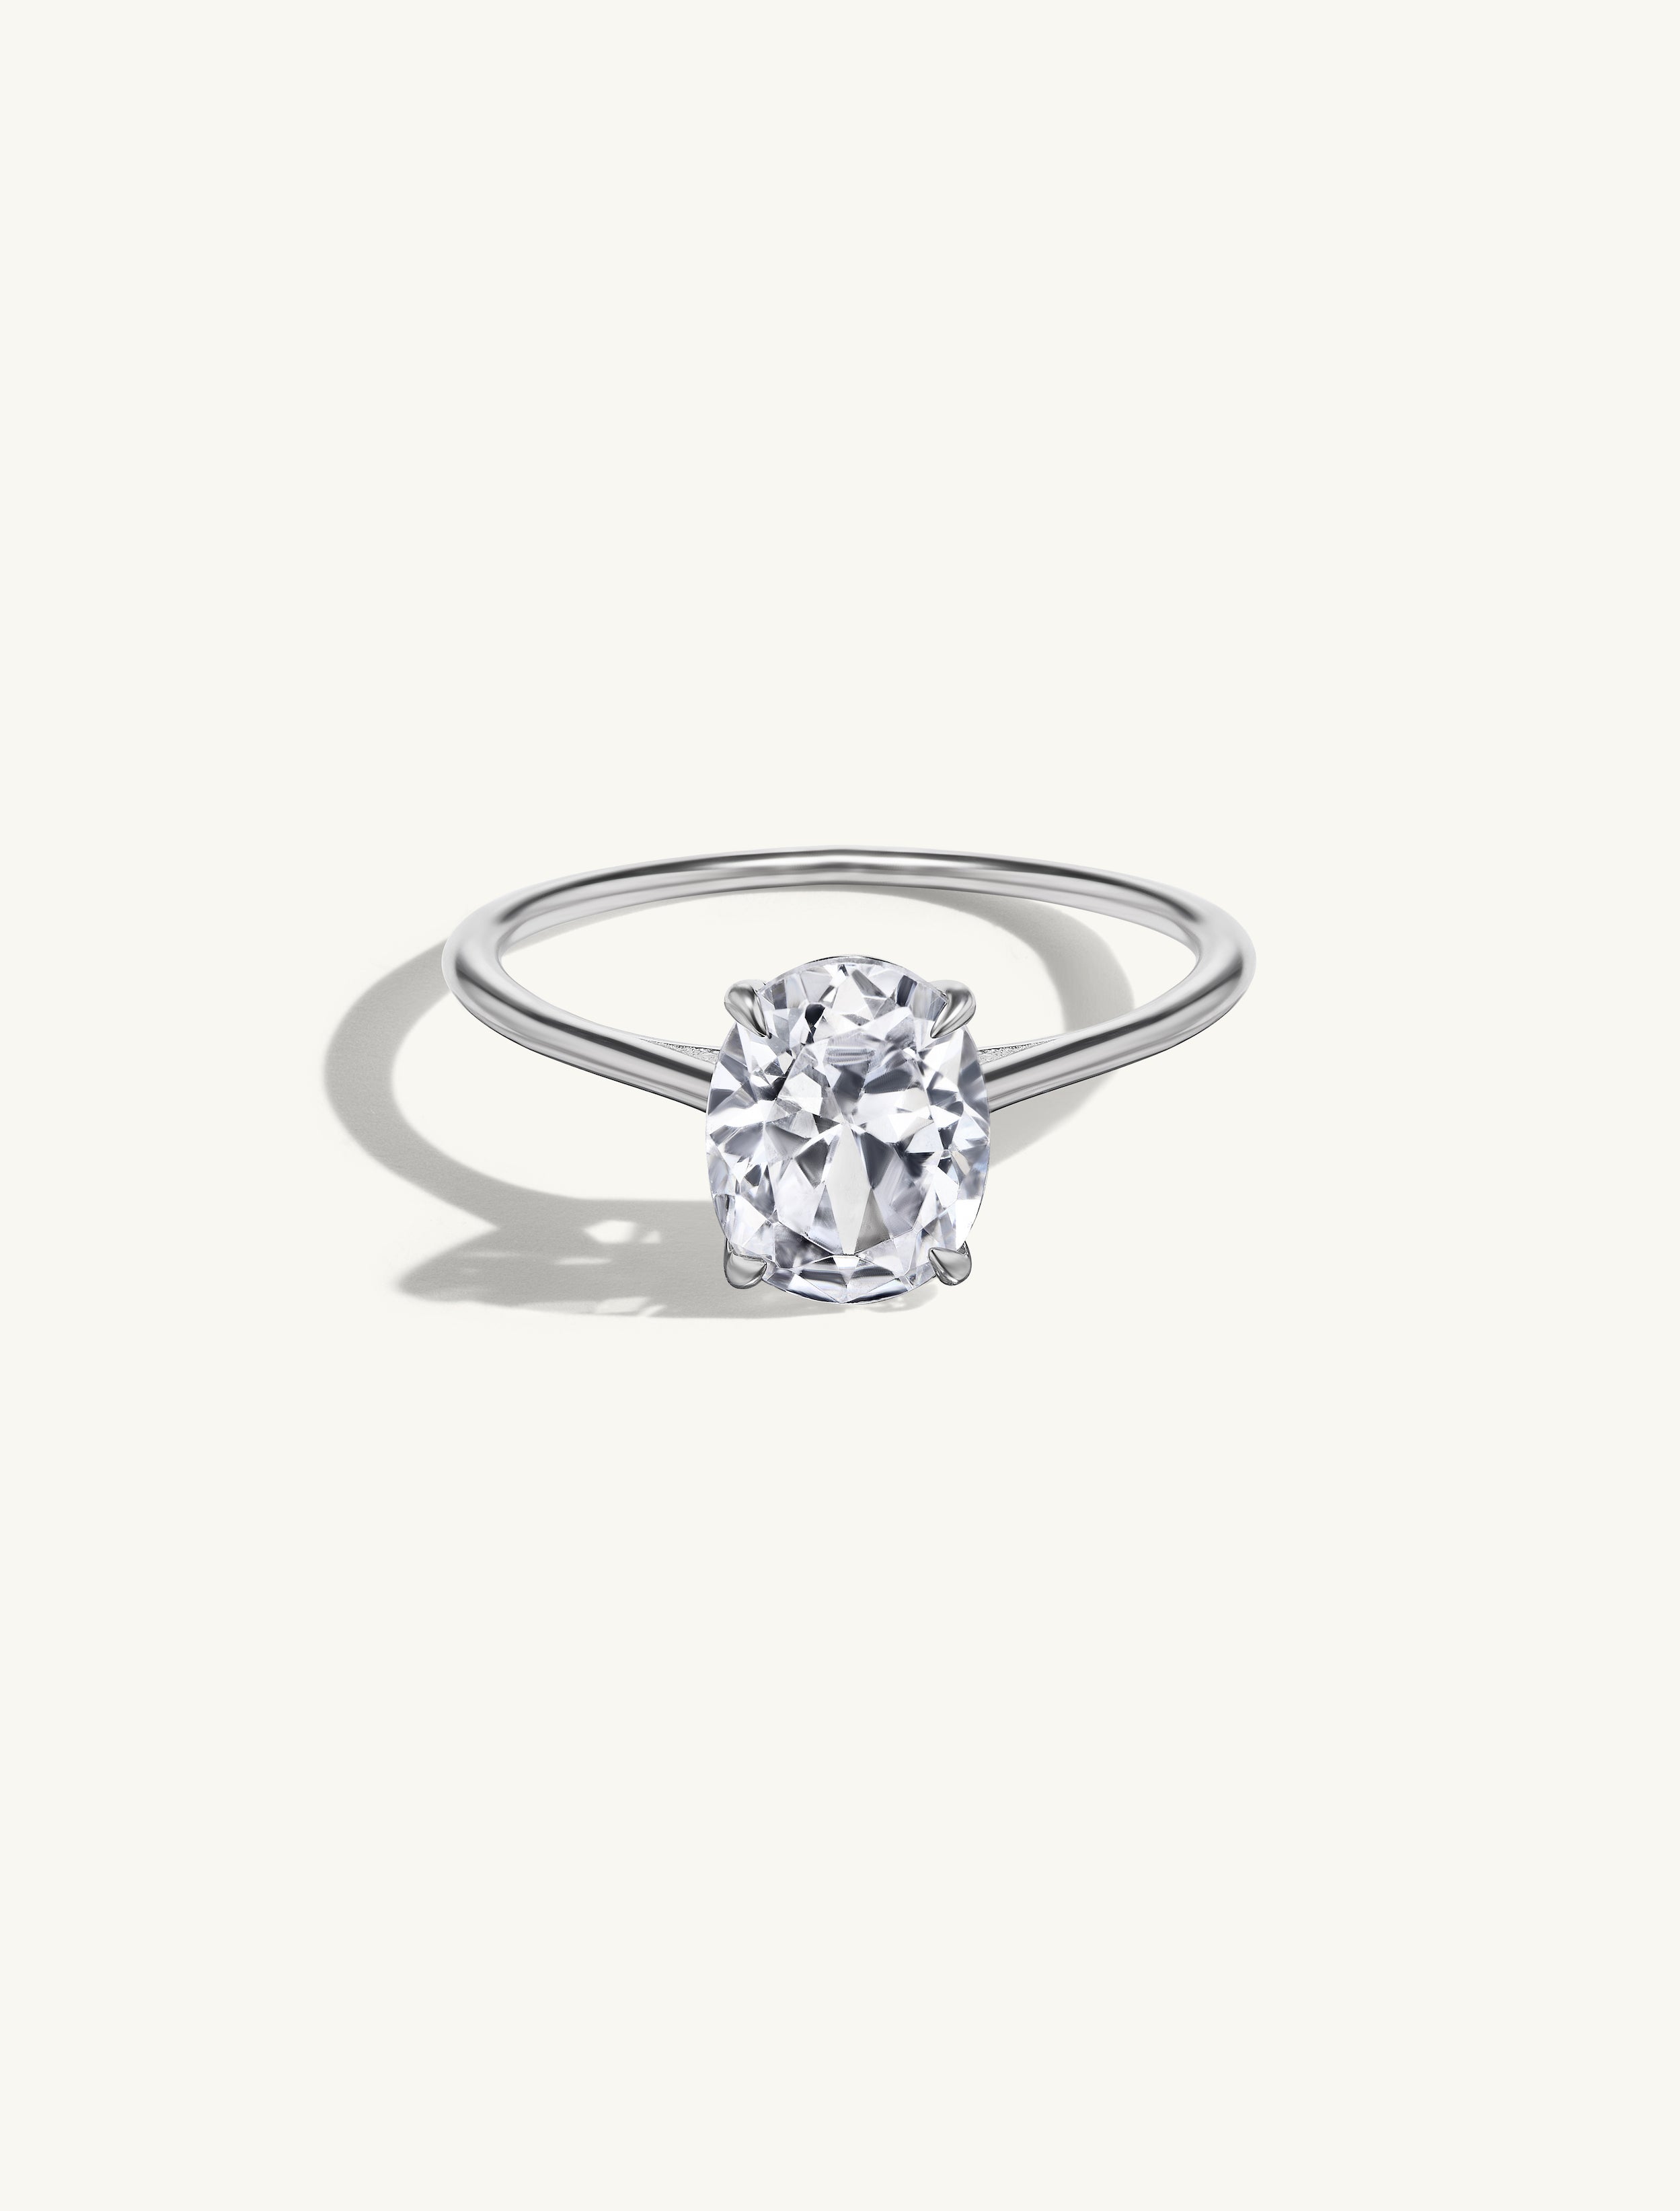 Floating Oval Engagement Try-On Ring